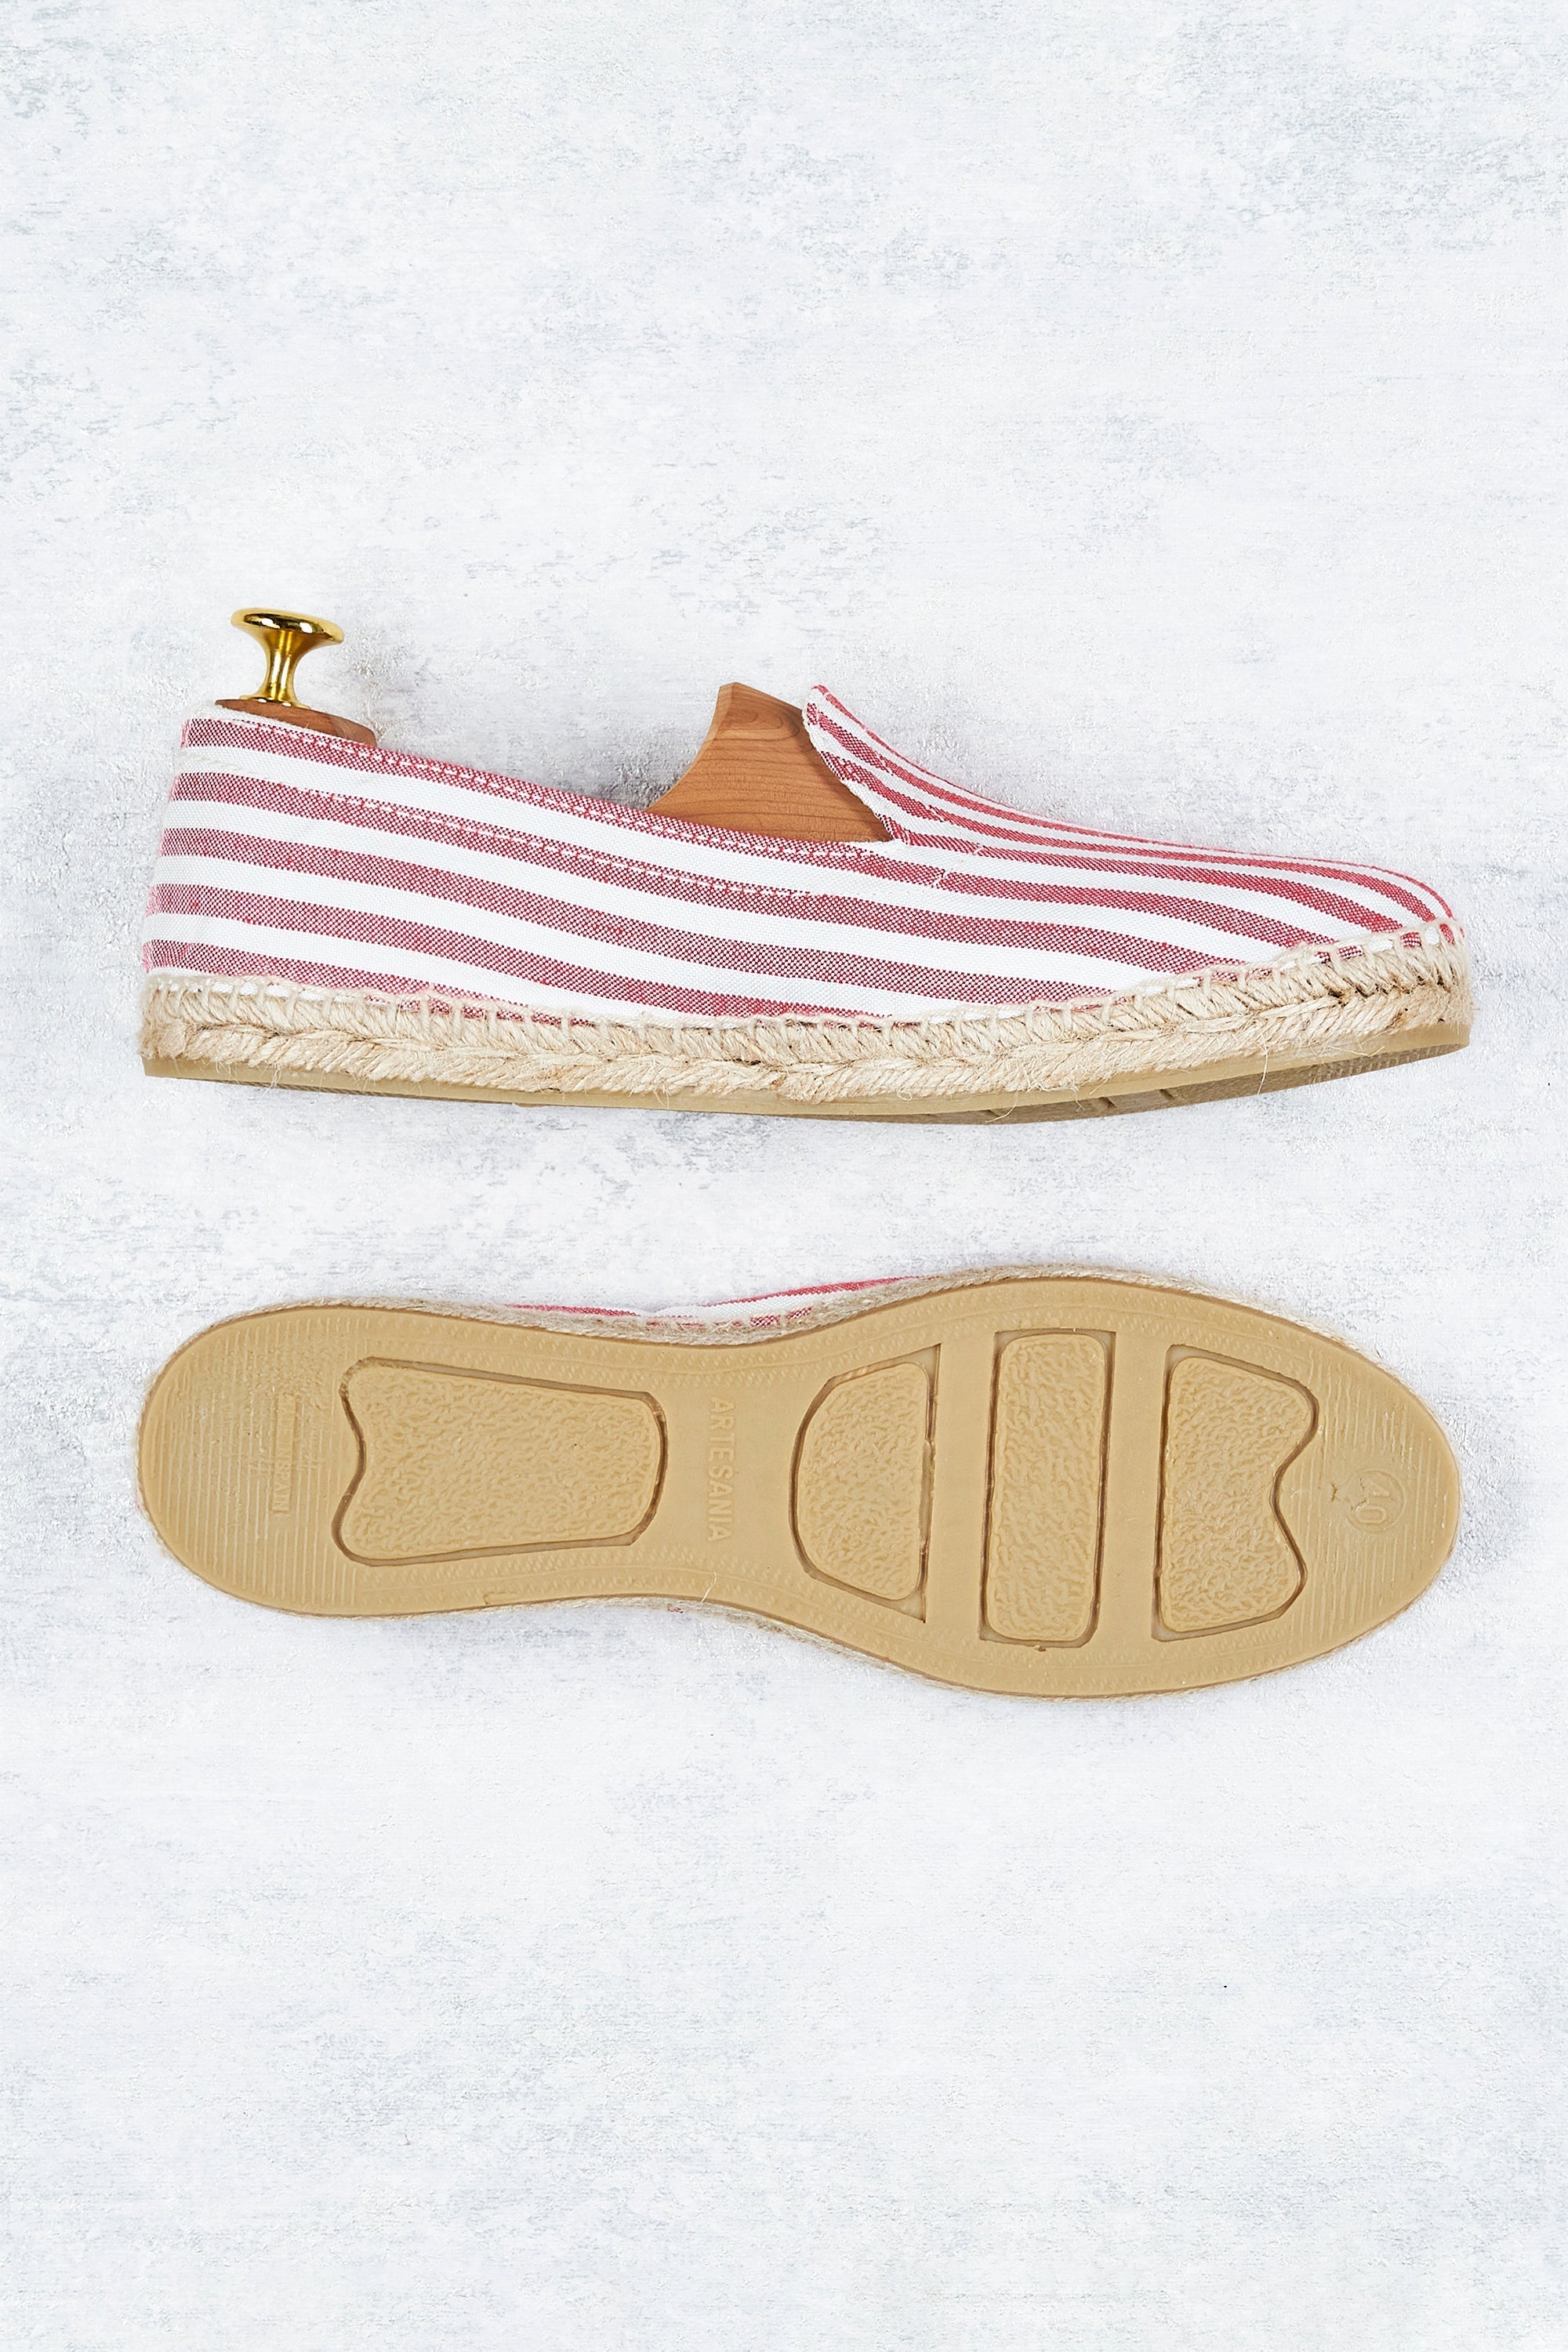 Drake's Red and White Stripe Canvas Espadrilles